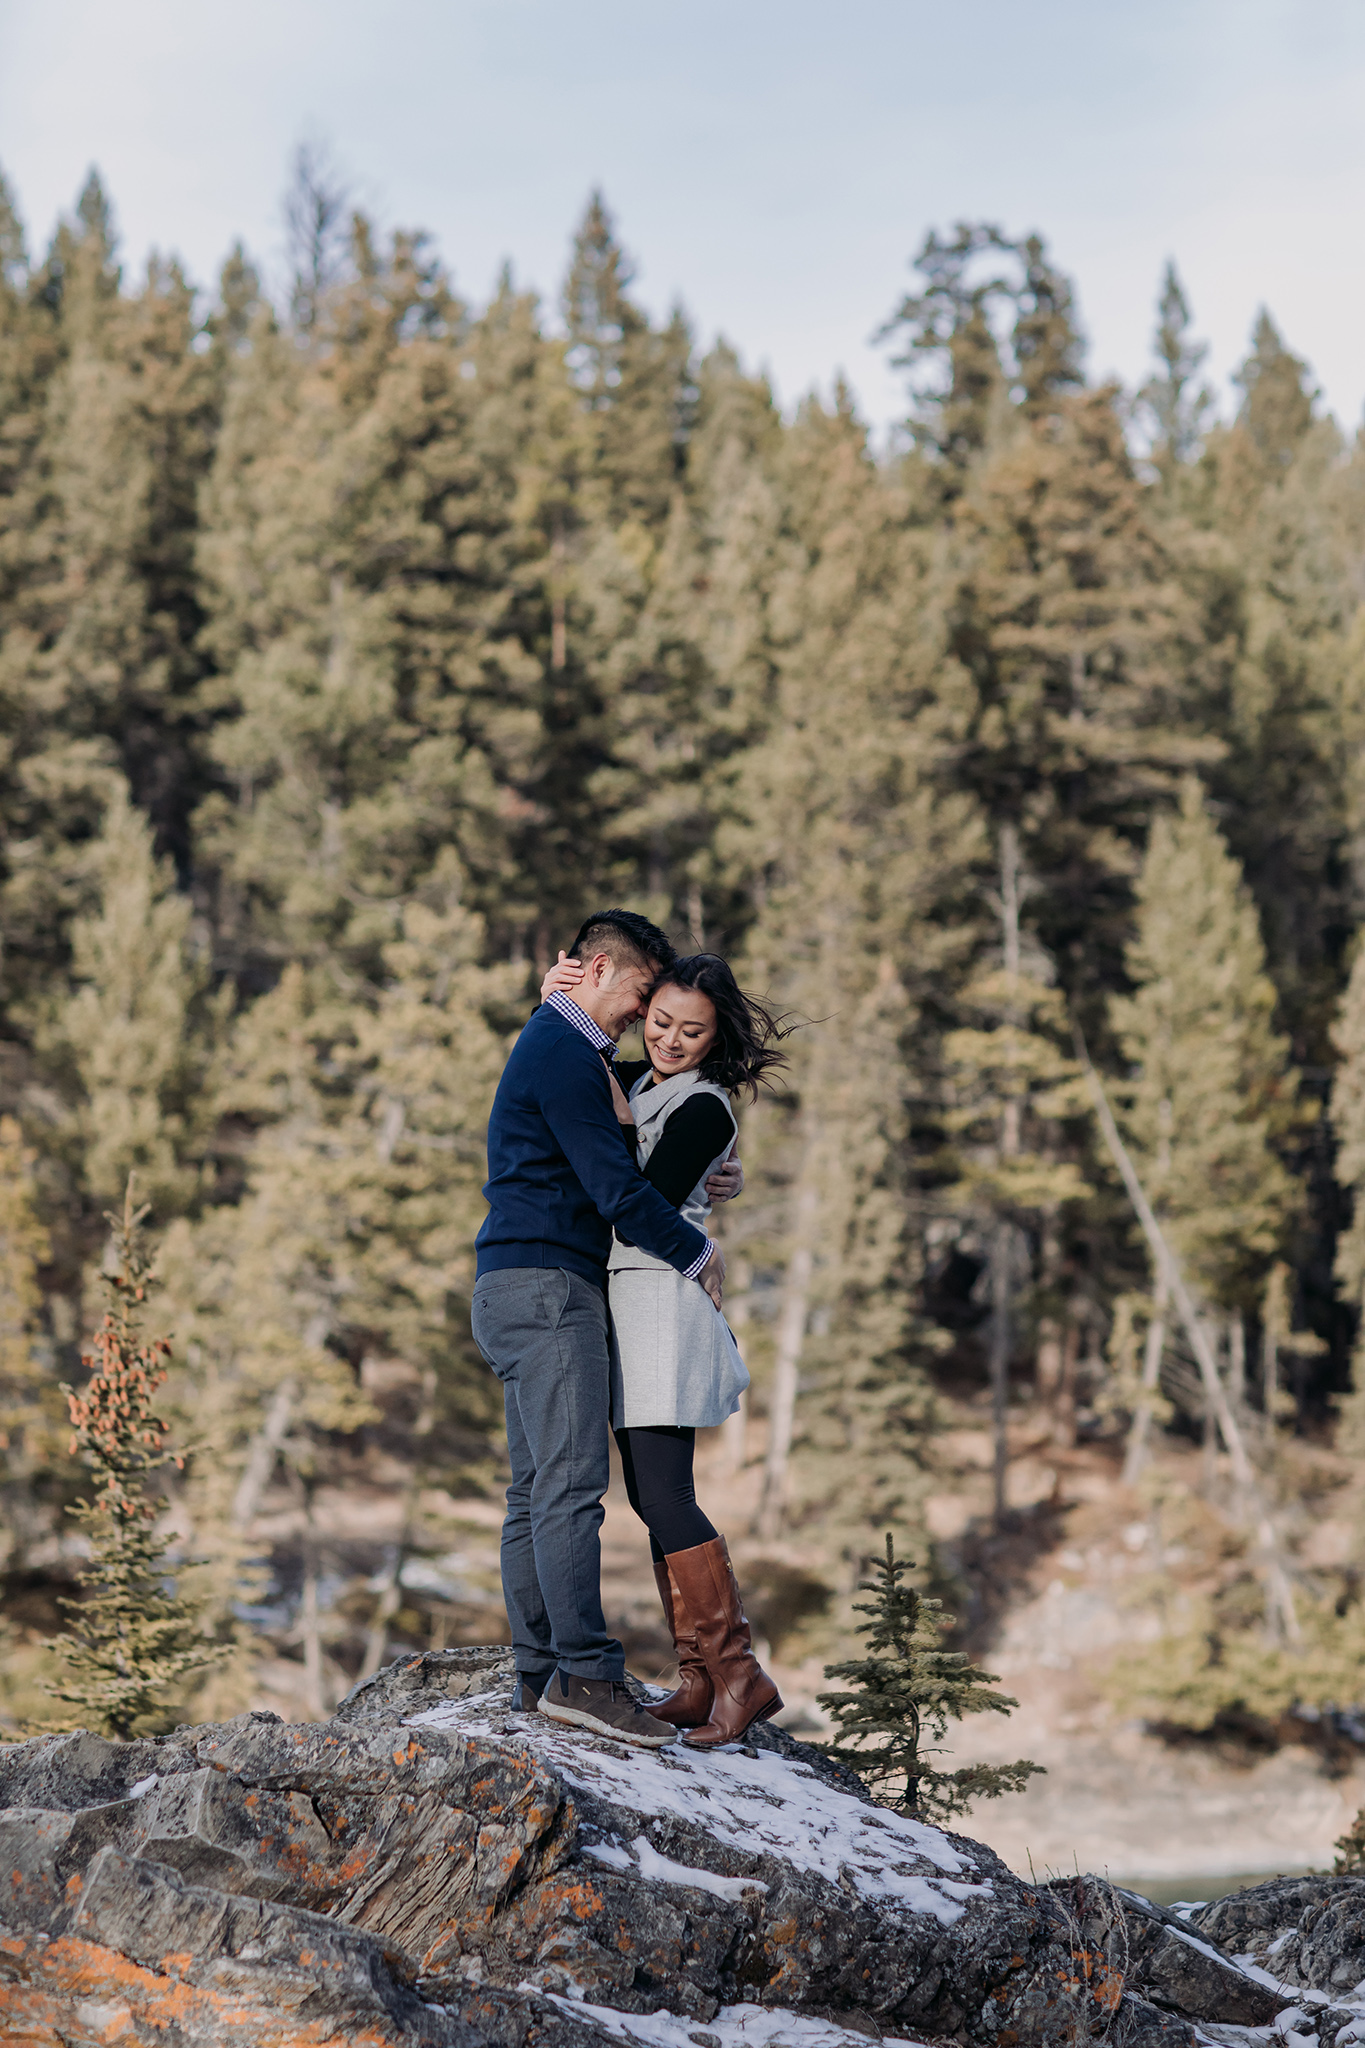 Banff National Park early winter November engagement session on a windy day at Bow Falls